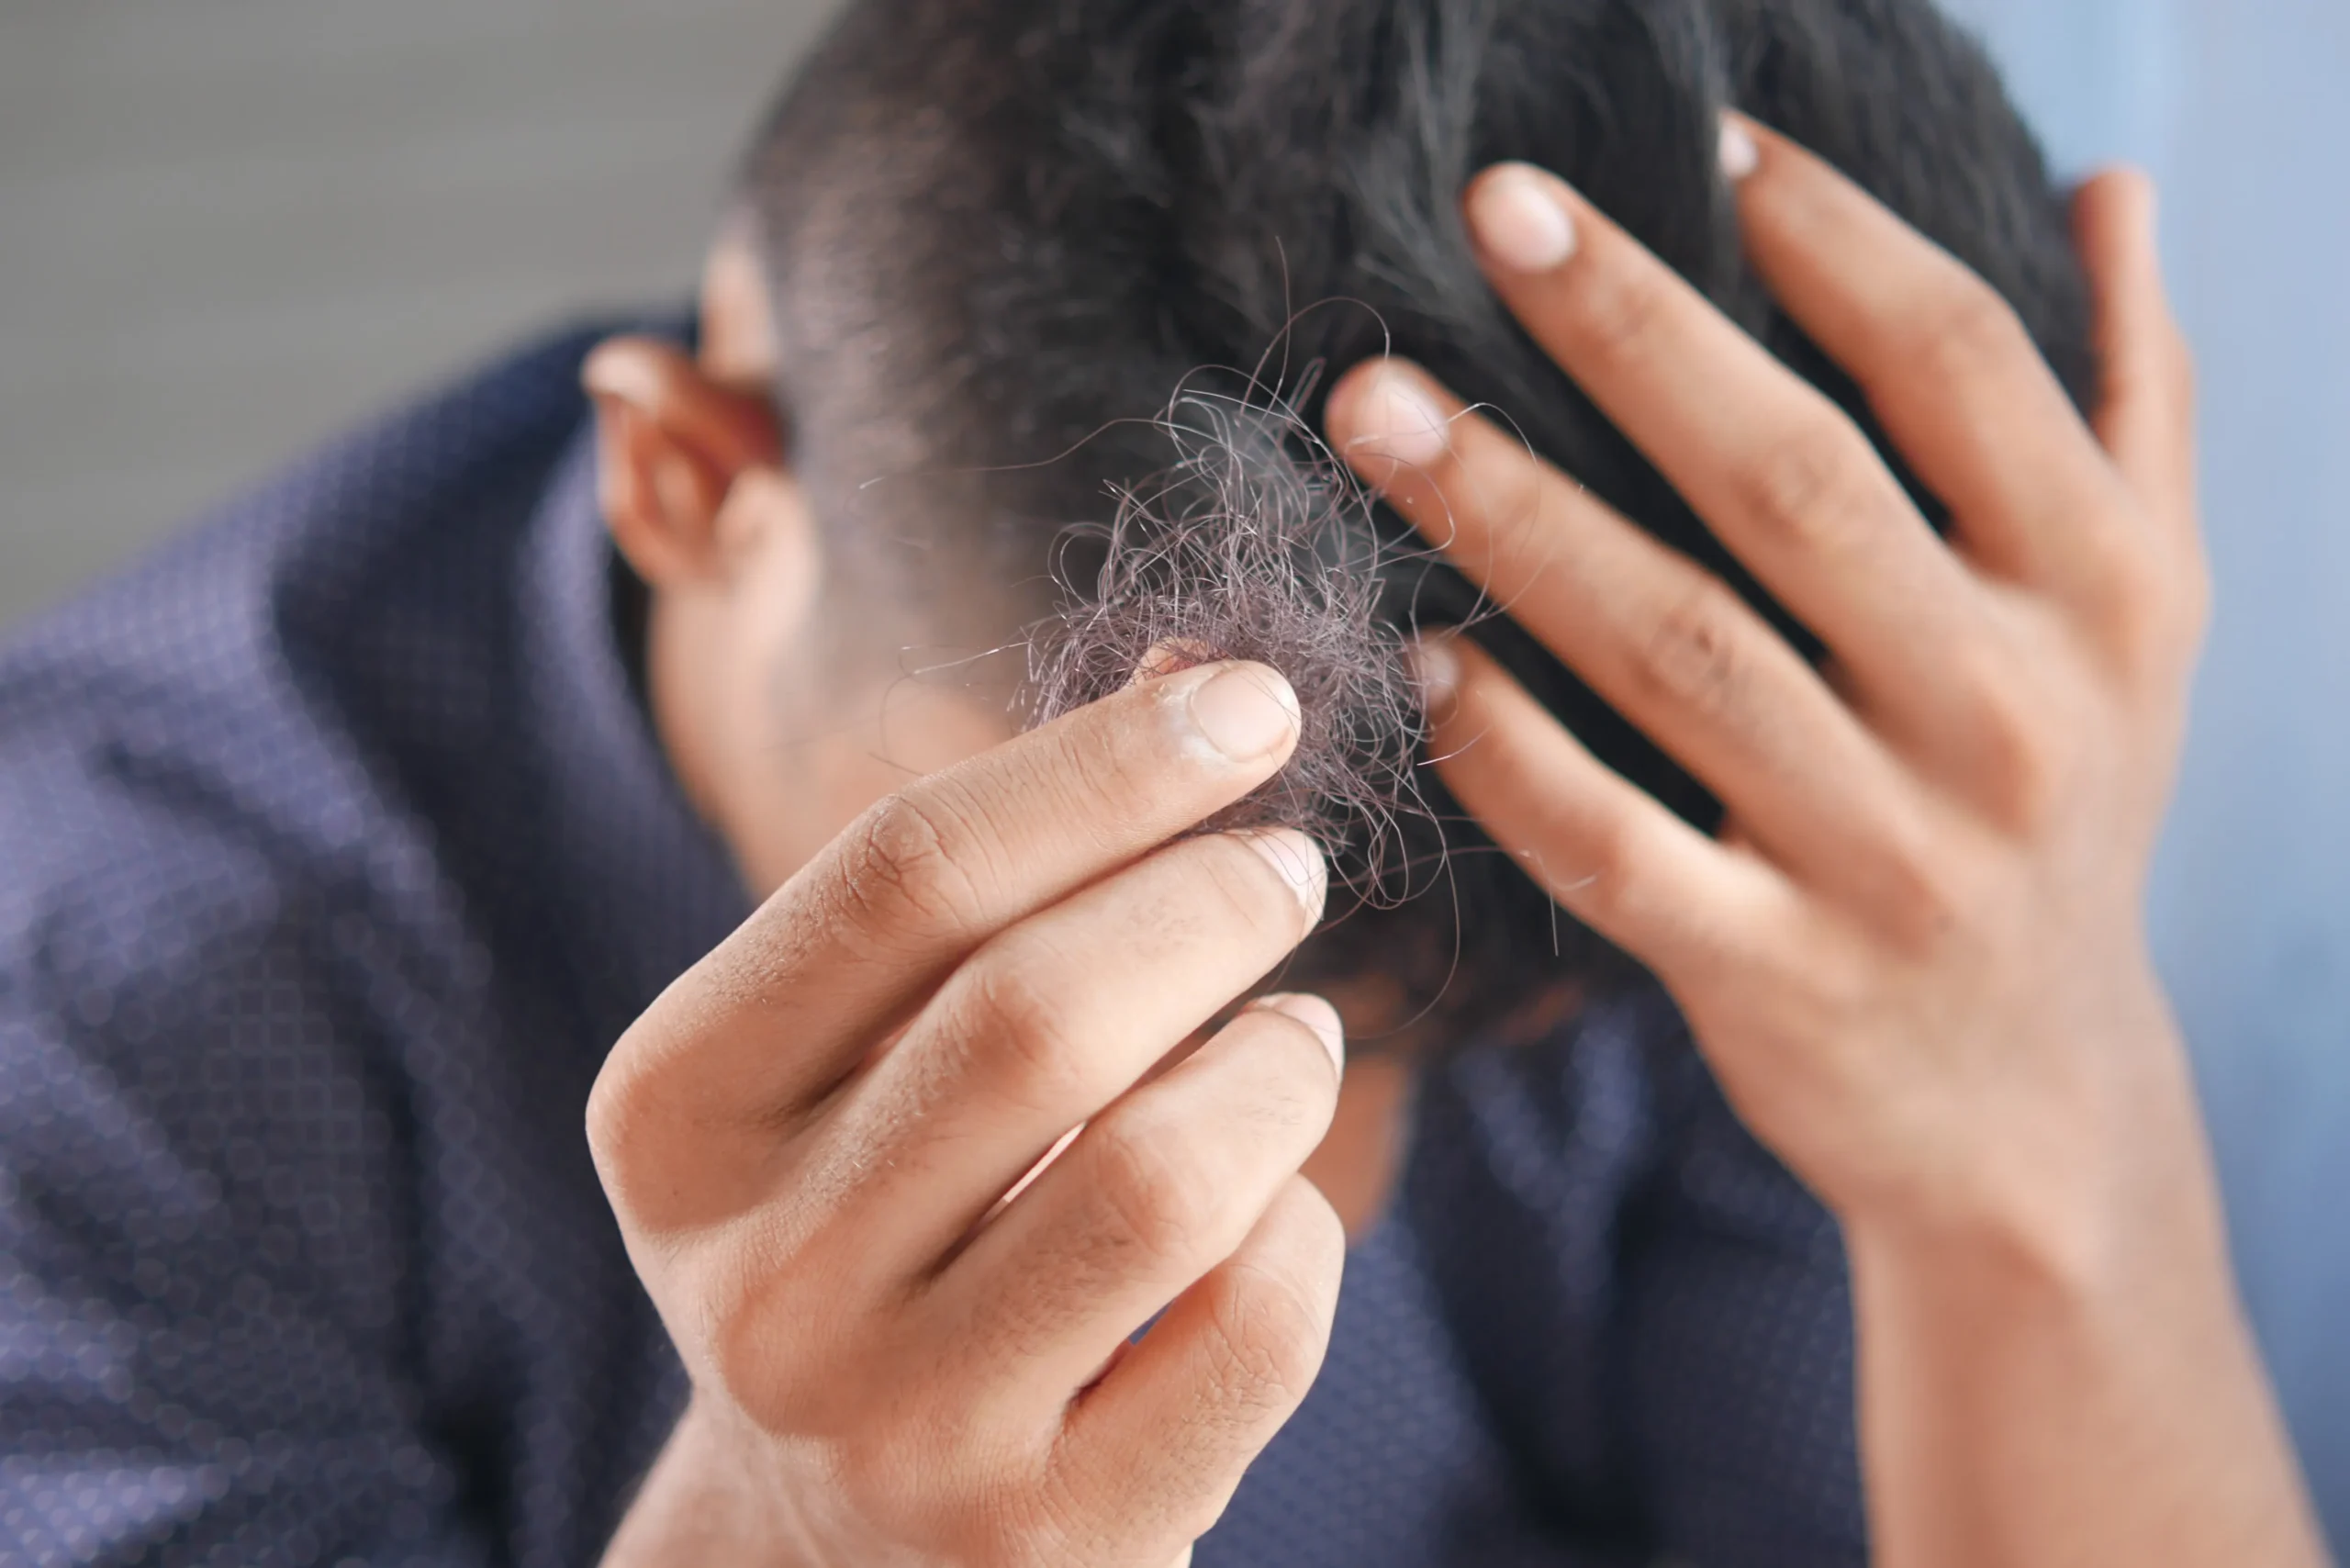 Can depression cause hair loss